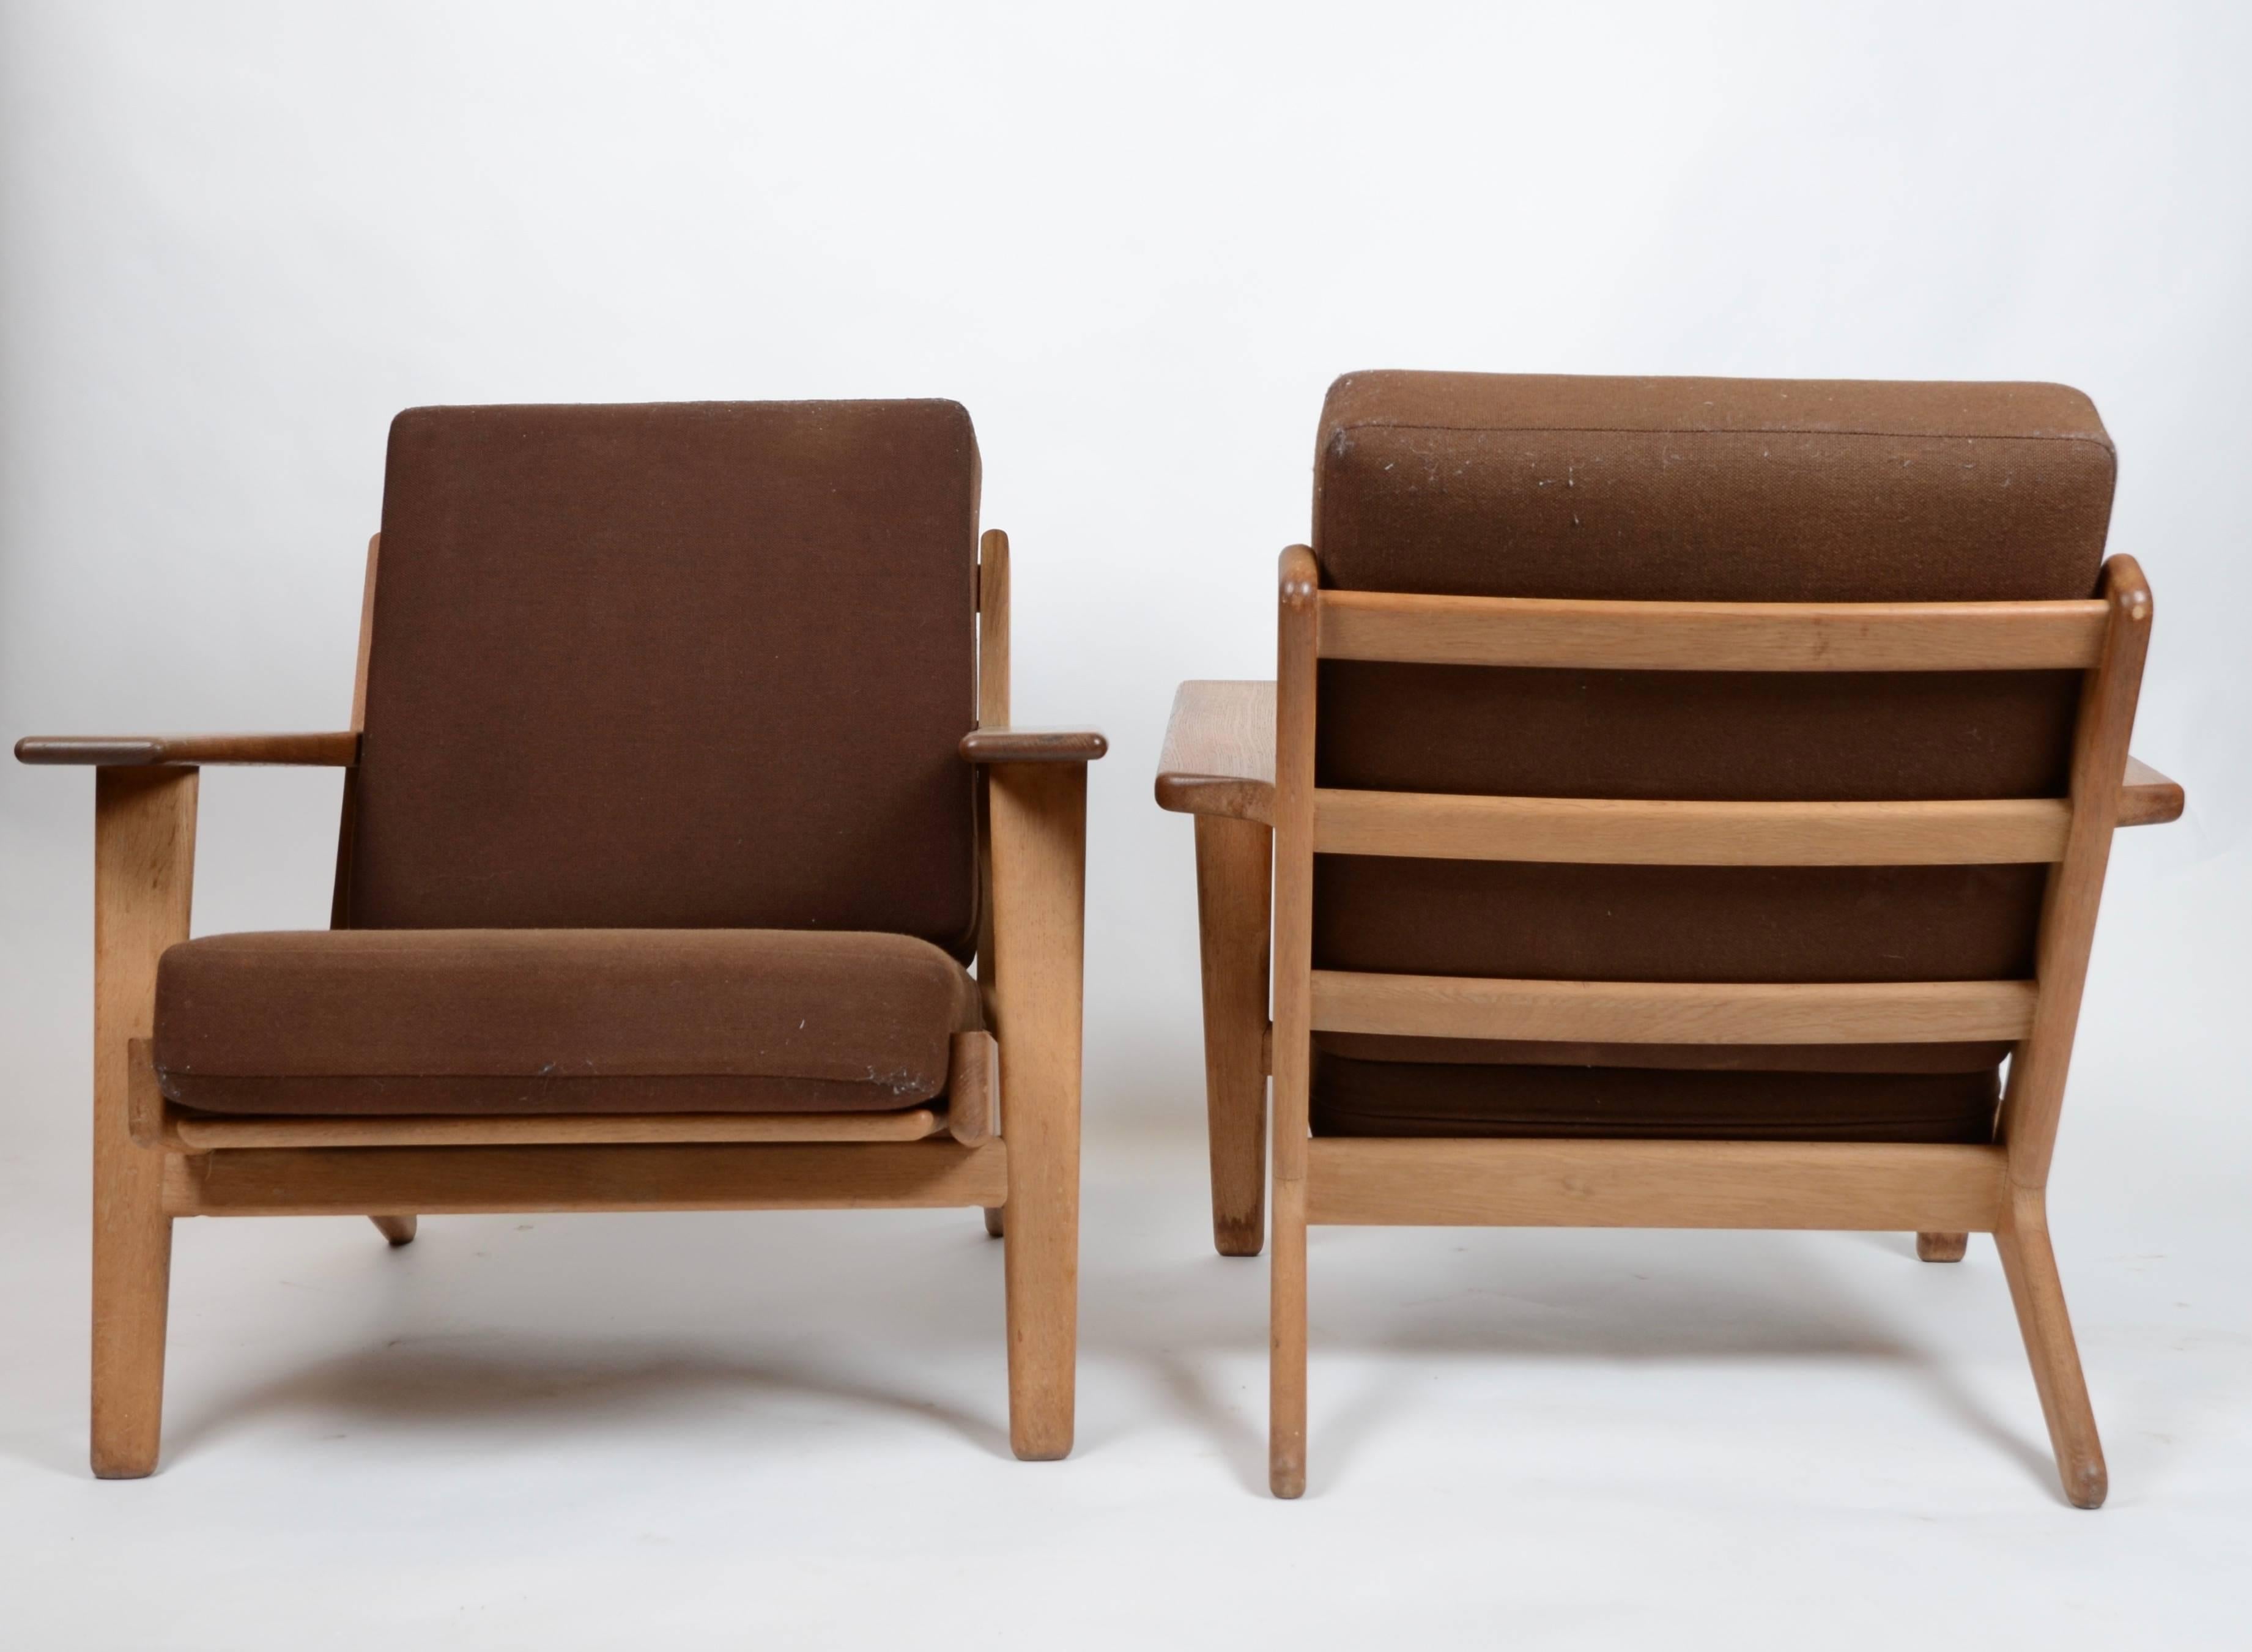 Mid-Century Modern Lounge Chairs with Stools, GE290 by Hans J. Wegner for GETAMA, Denmark